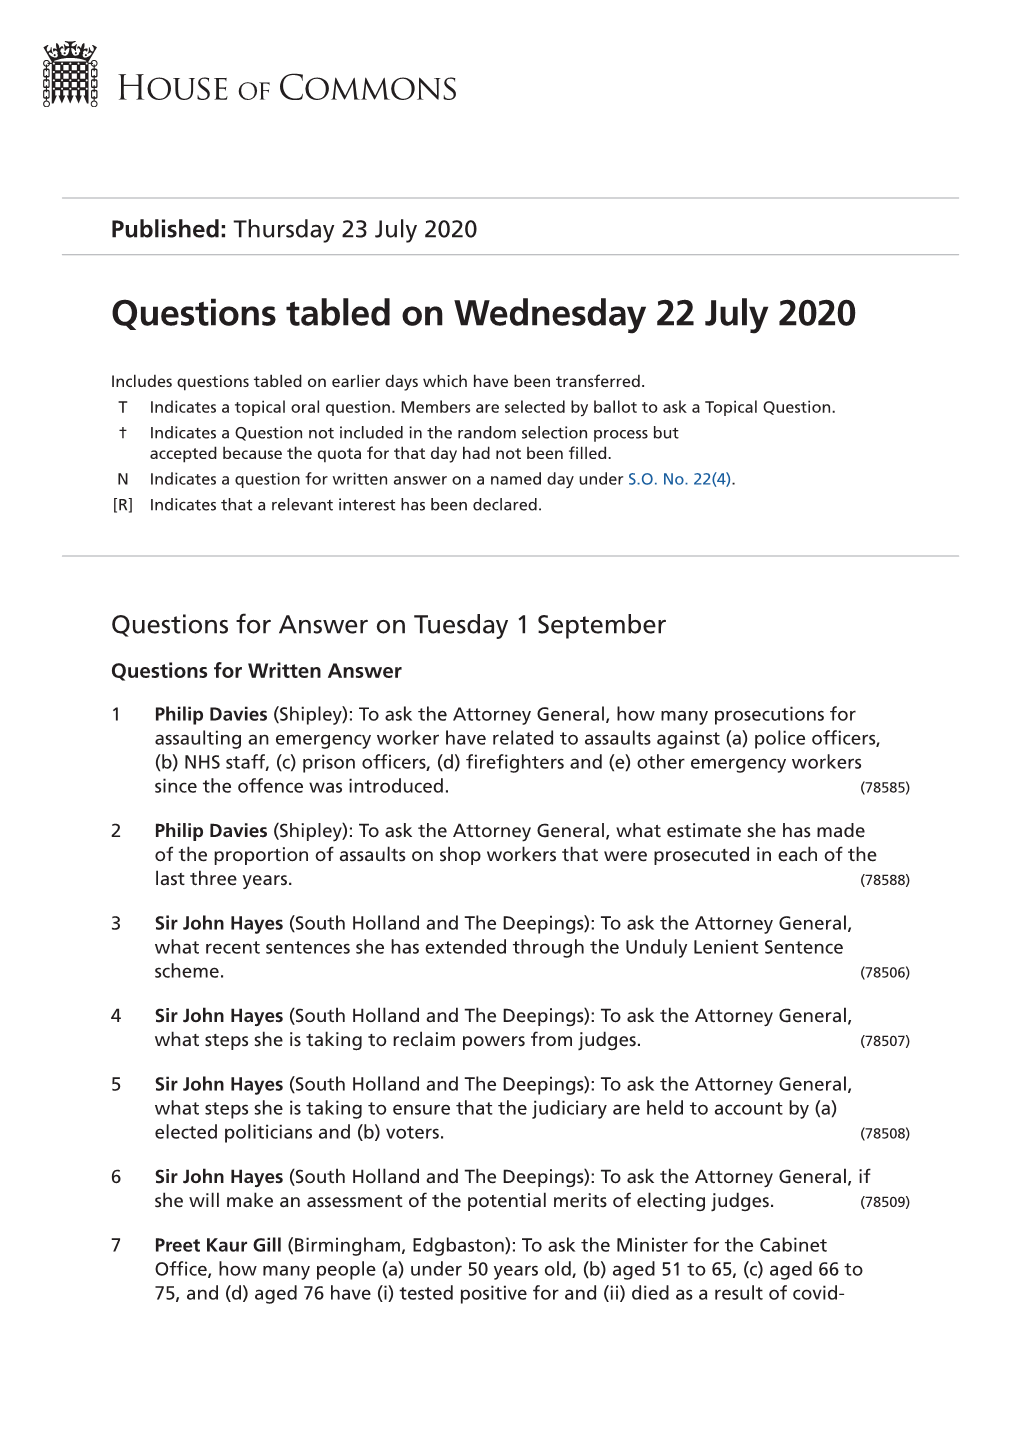 Questions Tabled on Wed 22 Jul 2020